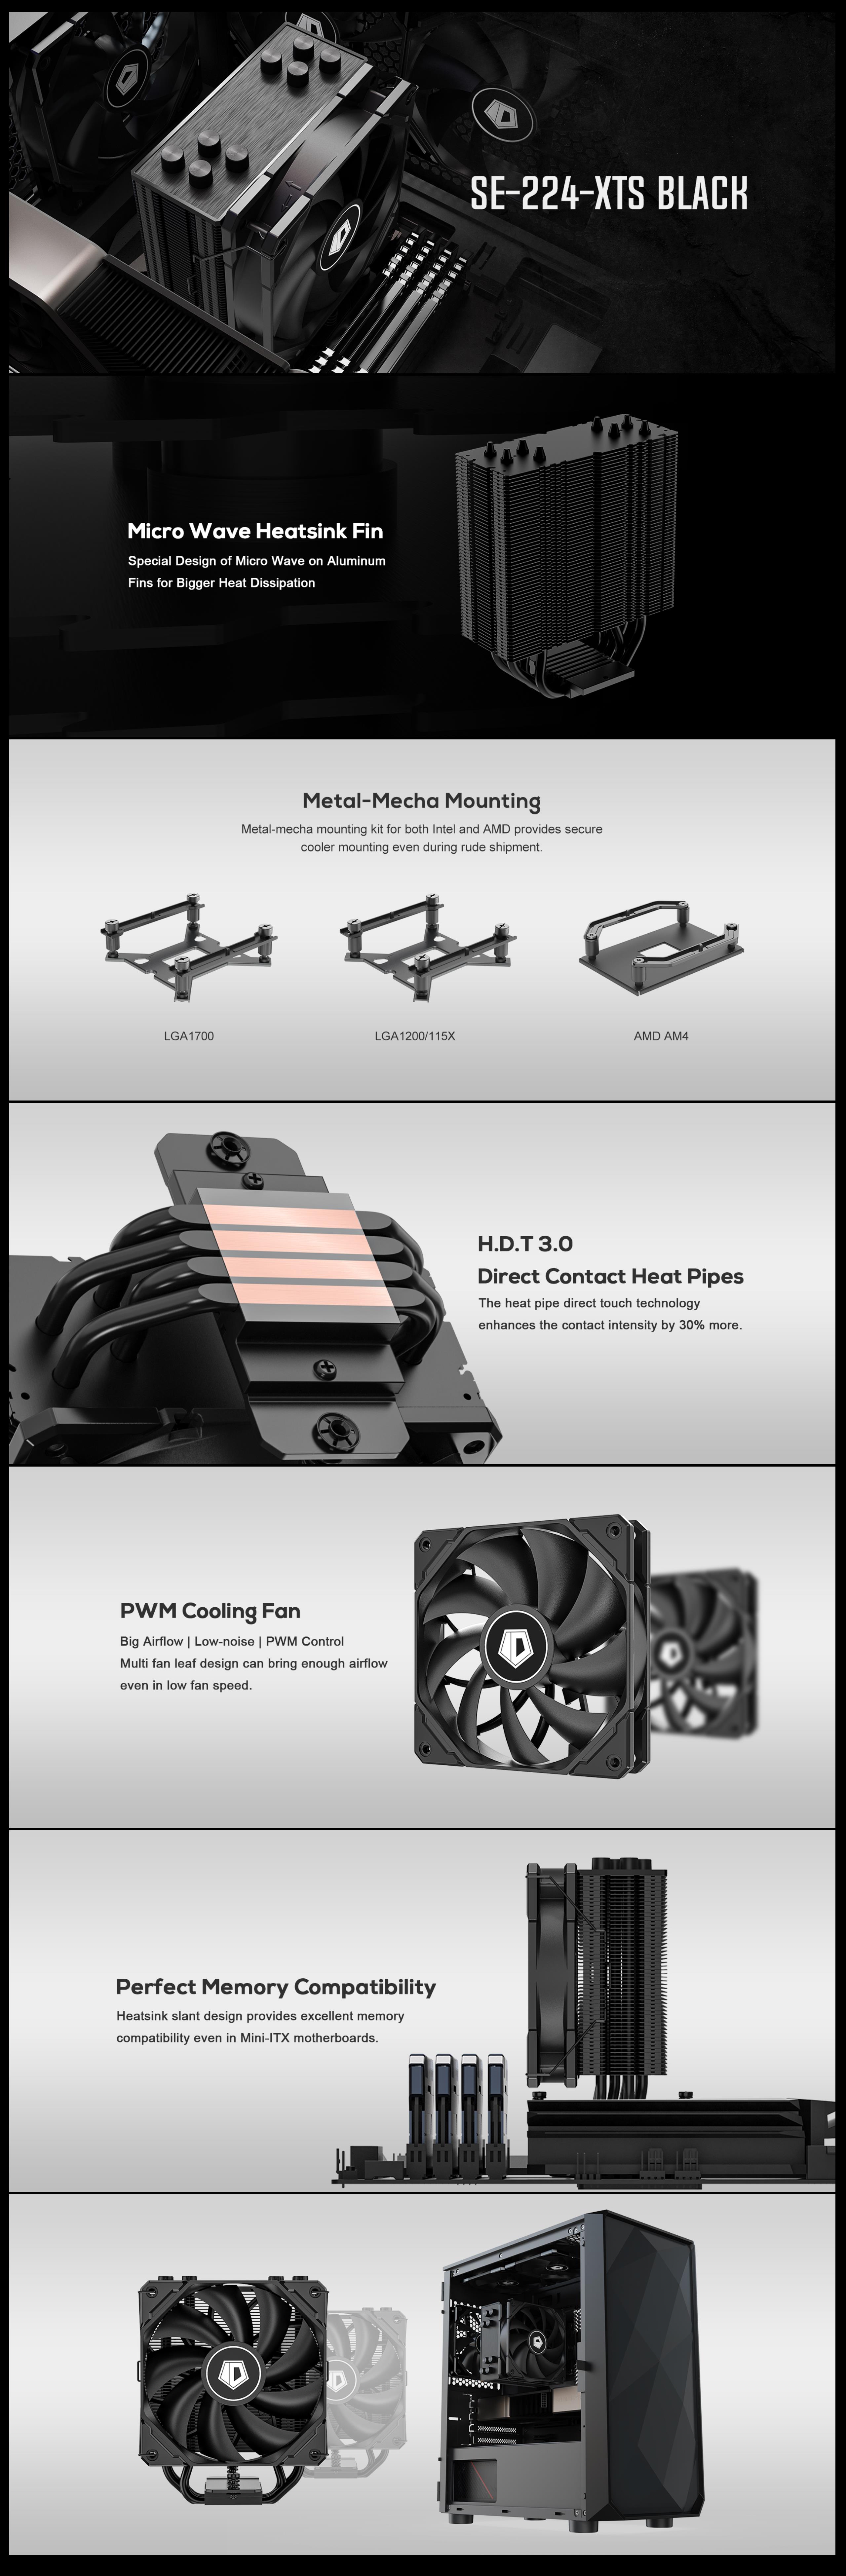 A large marketing image providing additional information about the product ID-COOLING SE-224-XTS Black CPU Cooler - Additional alt info not provided